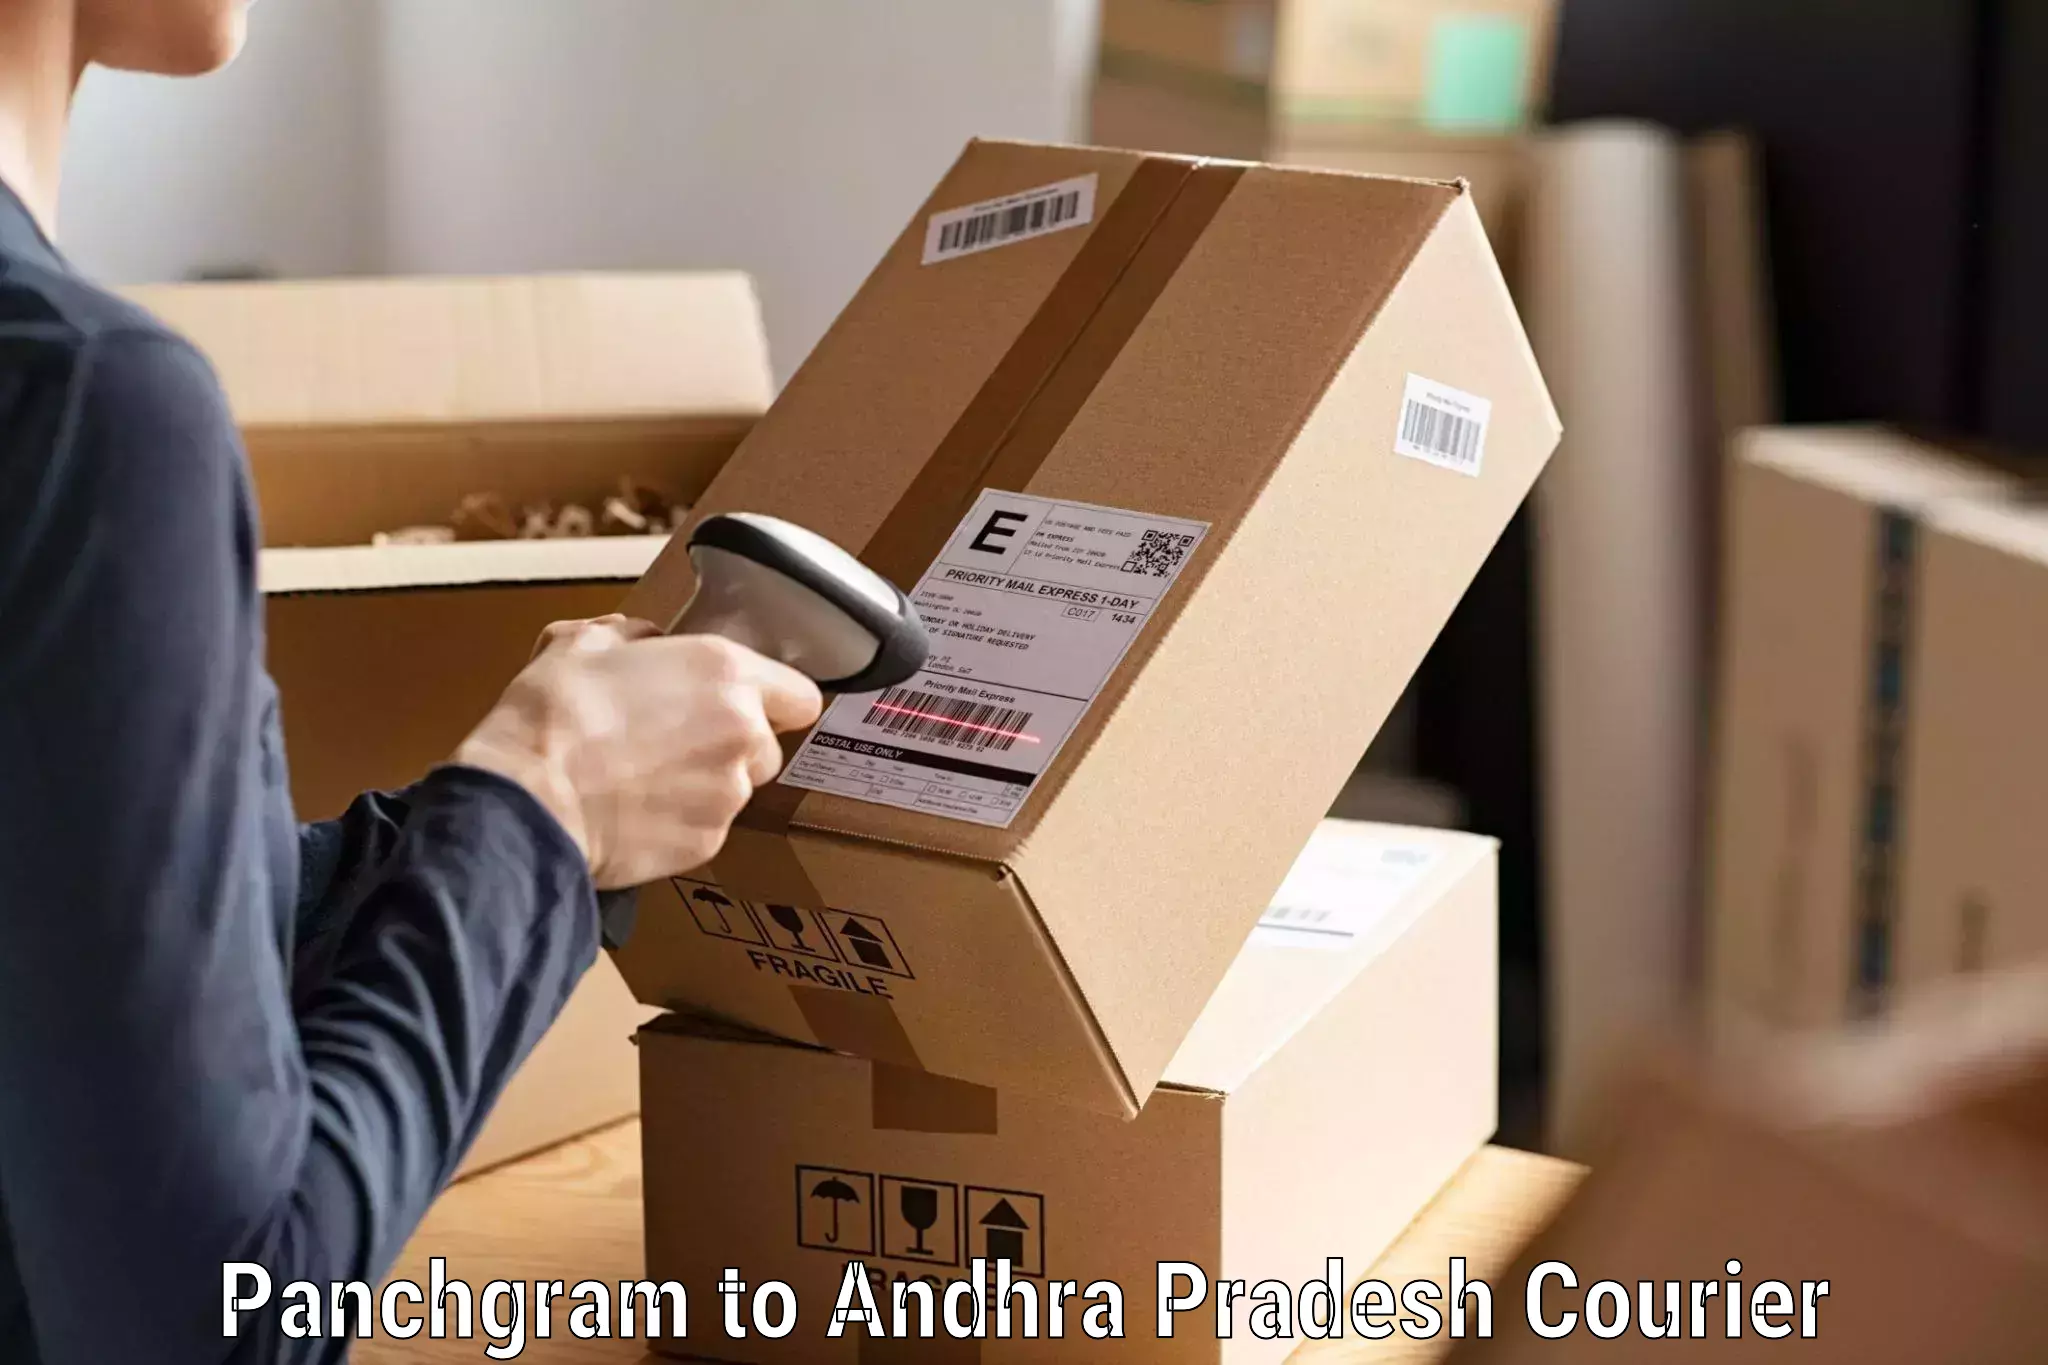 Pharmaceutical courier Panchgram to Visakhapatnam